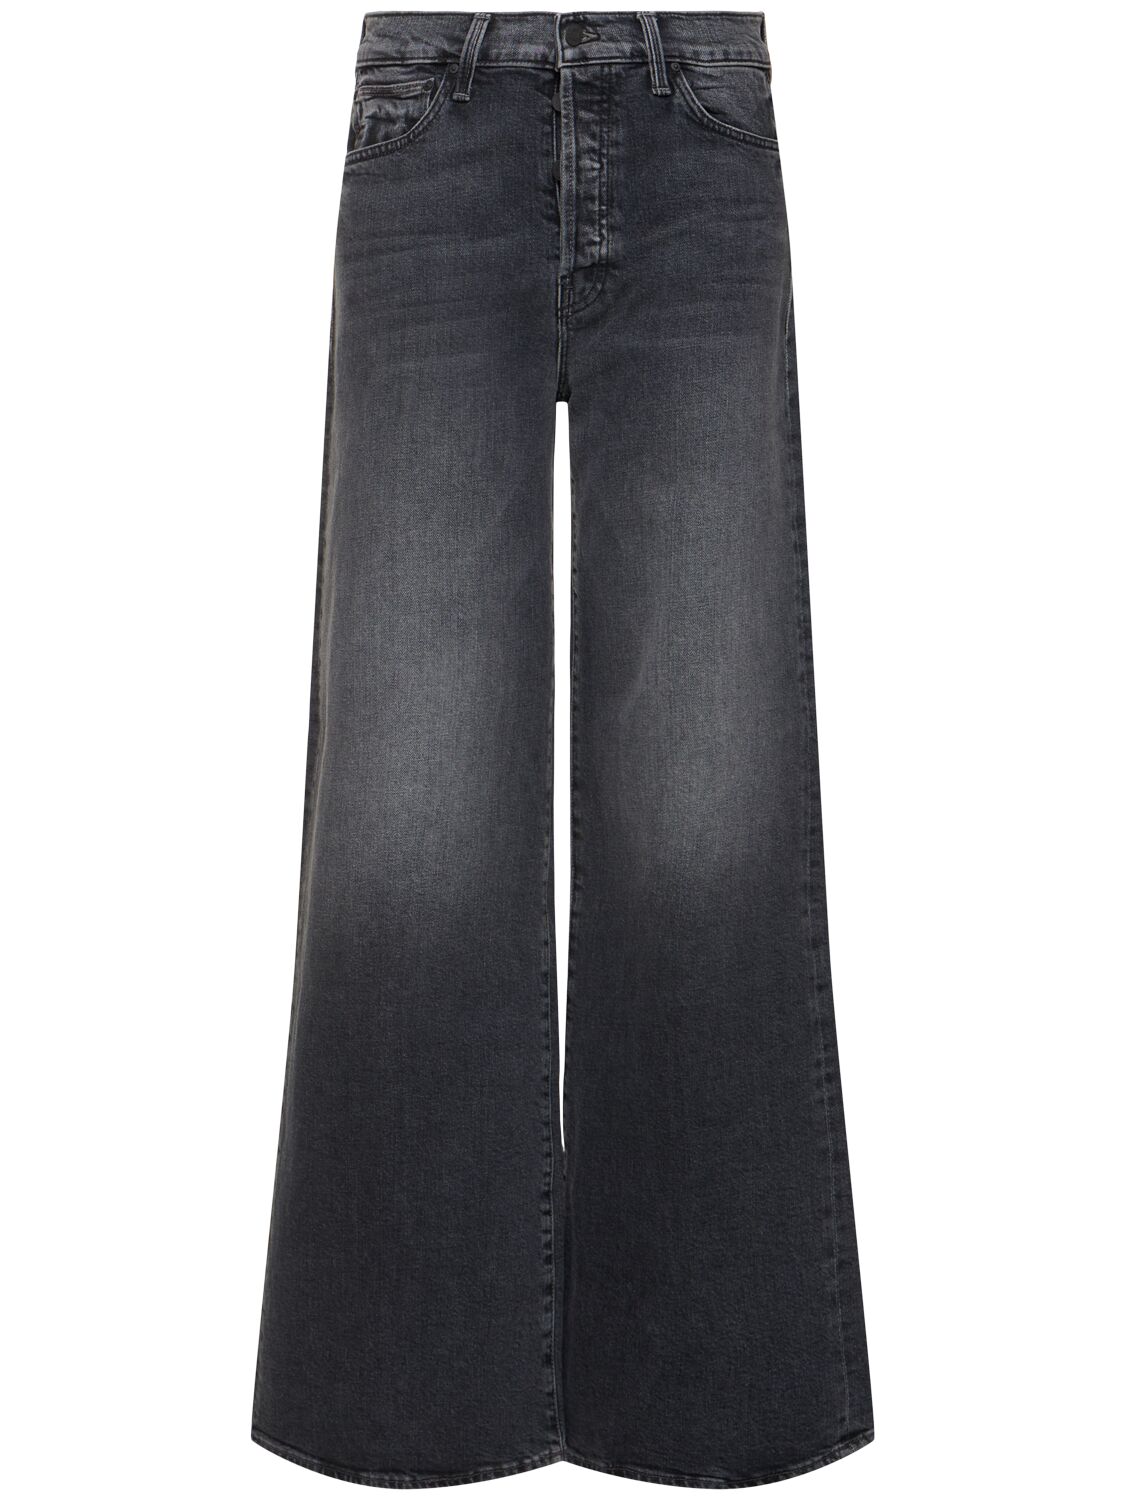 The Ditcher Roller Sneak Wide Jeans